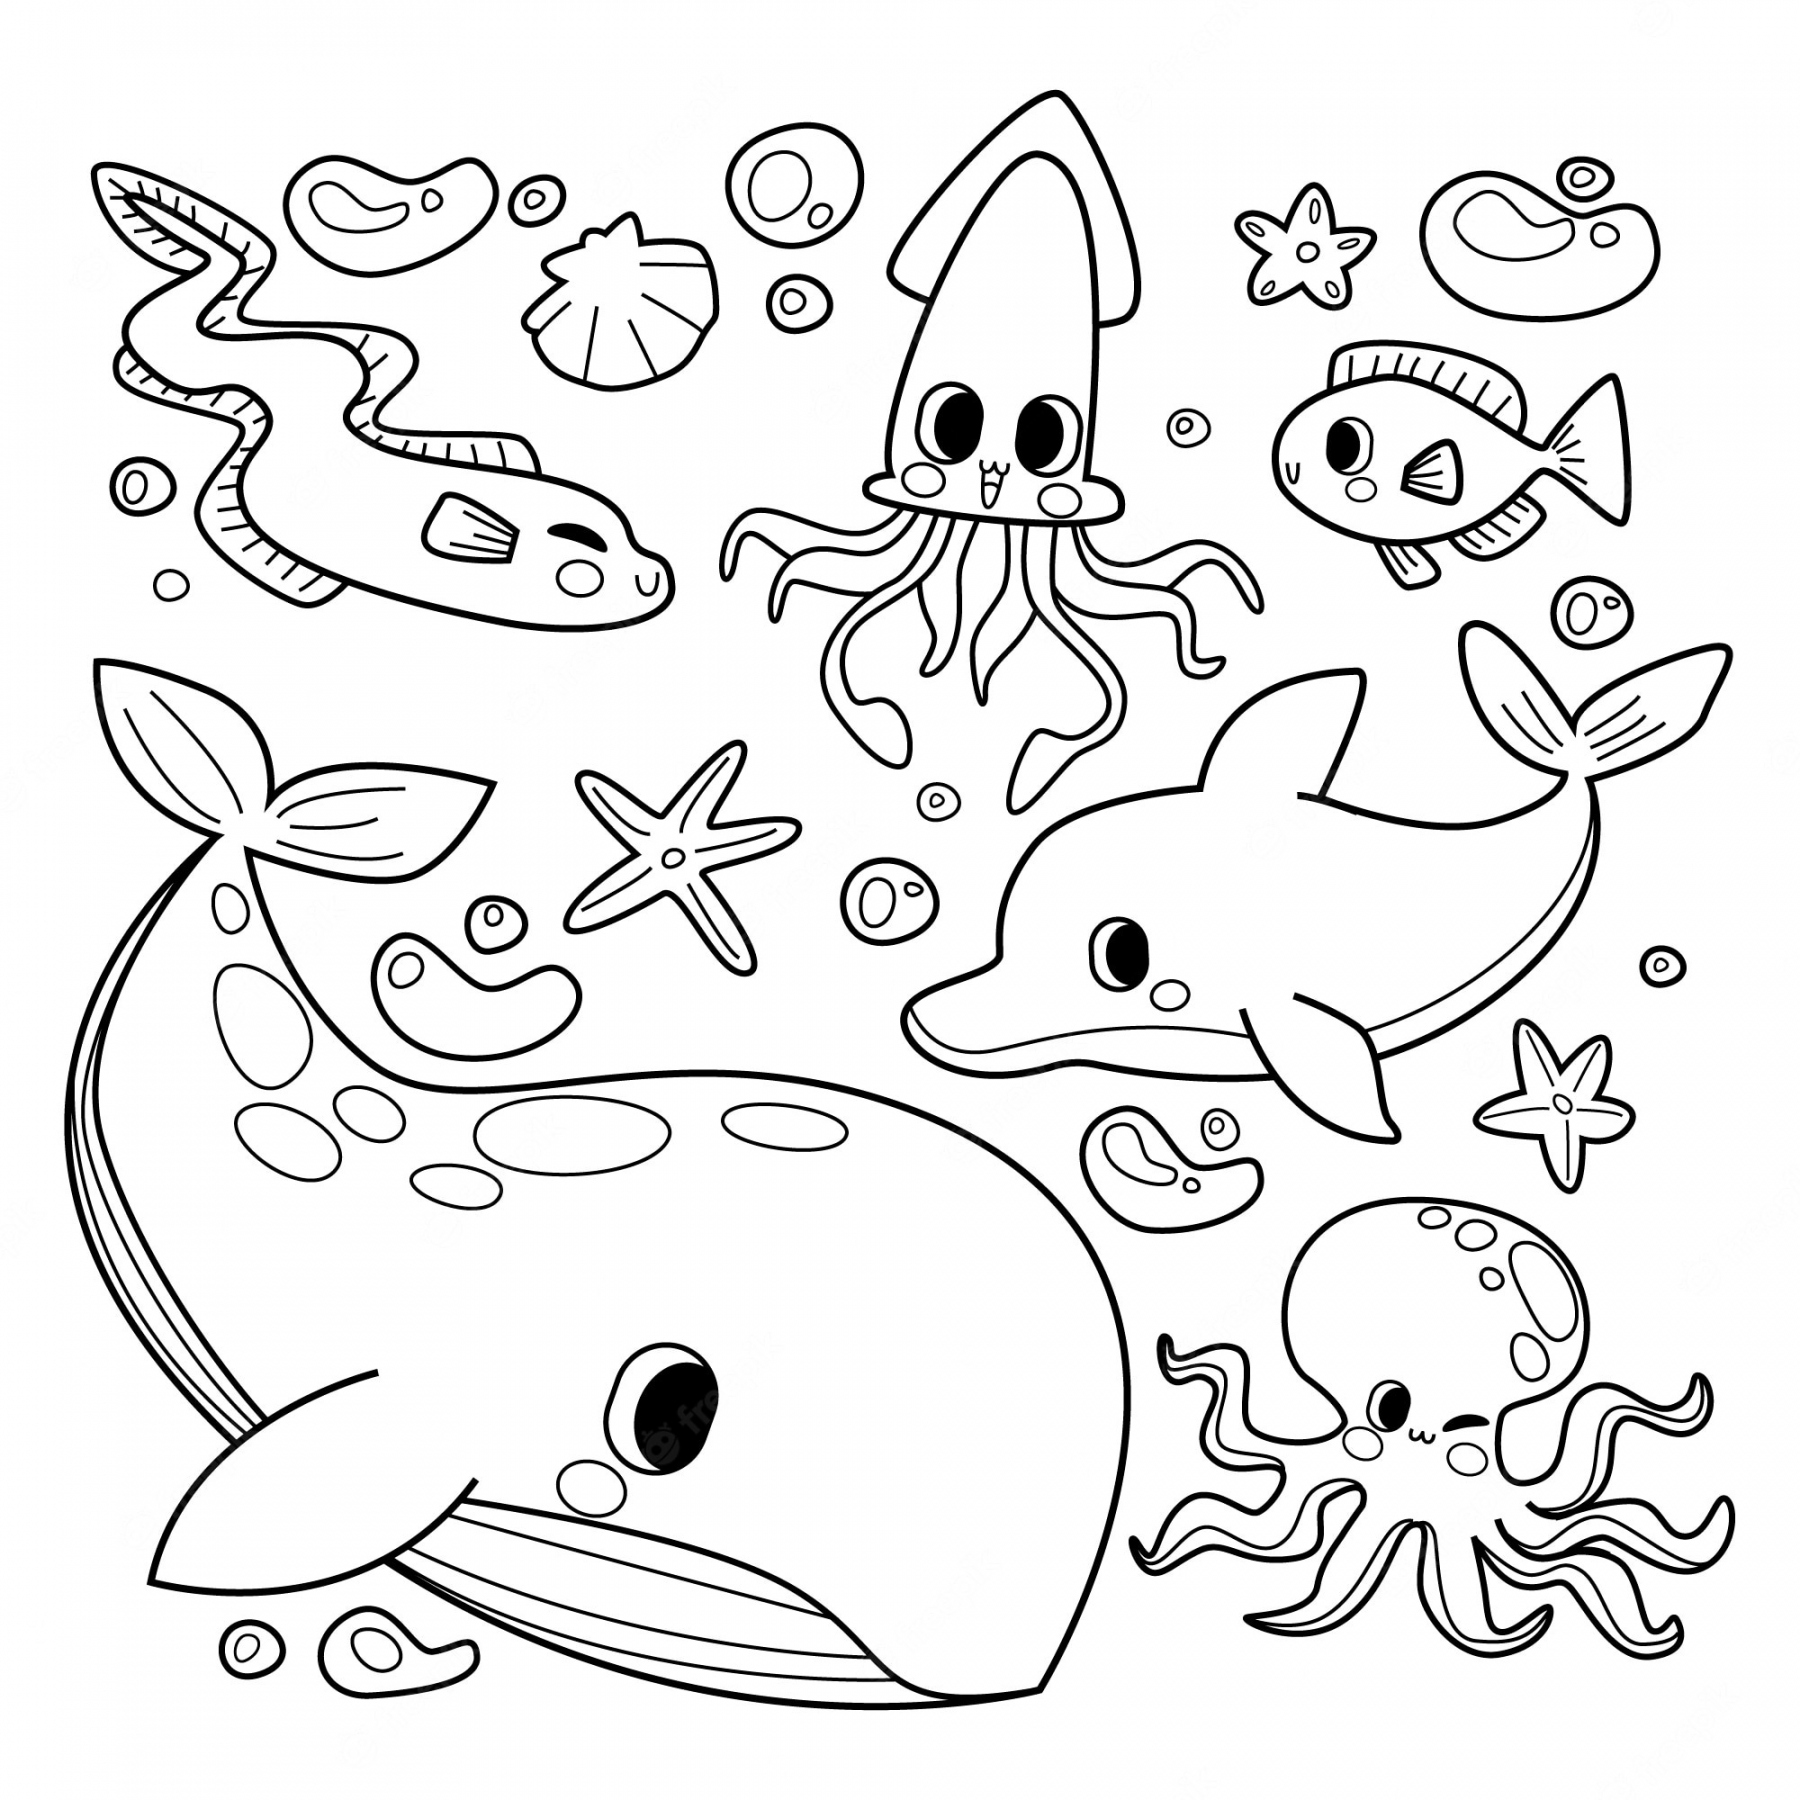 Free Printable Coloring Pages For Kids - Printable - Coloring Pages Images - Free Download on Freepik